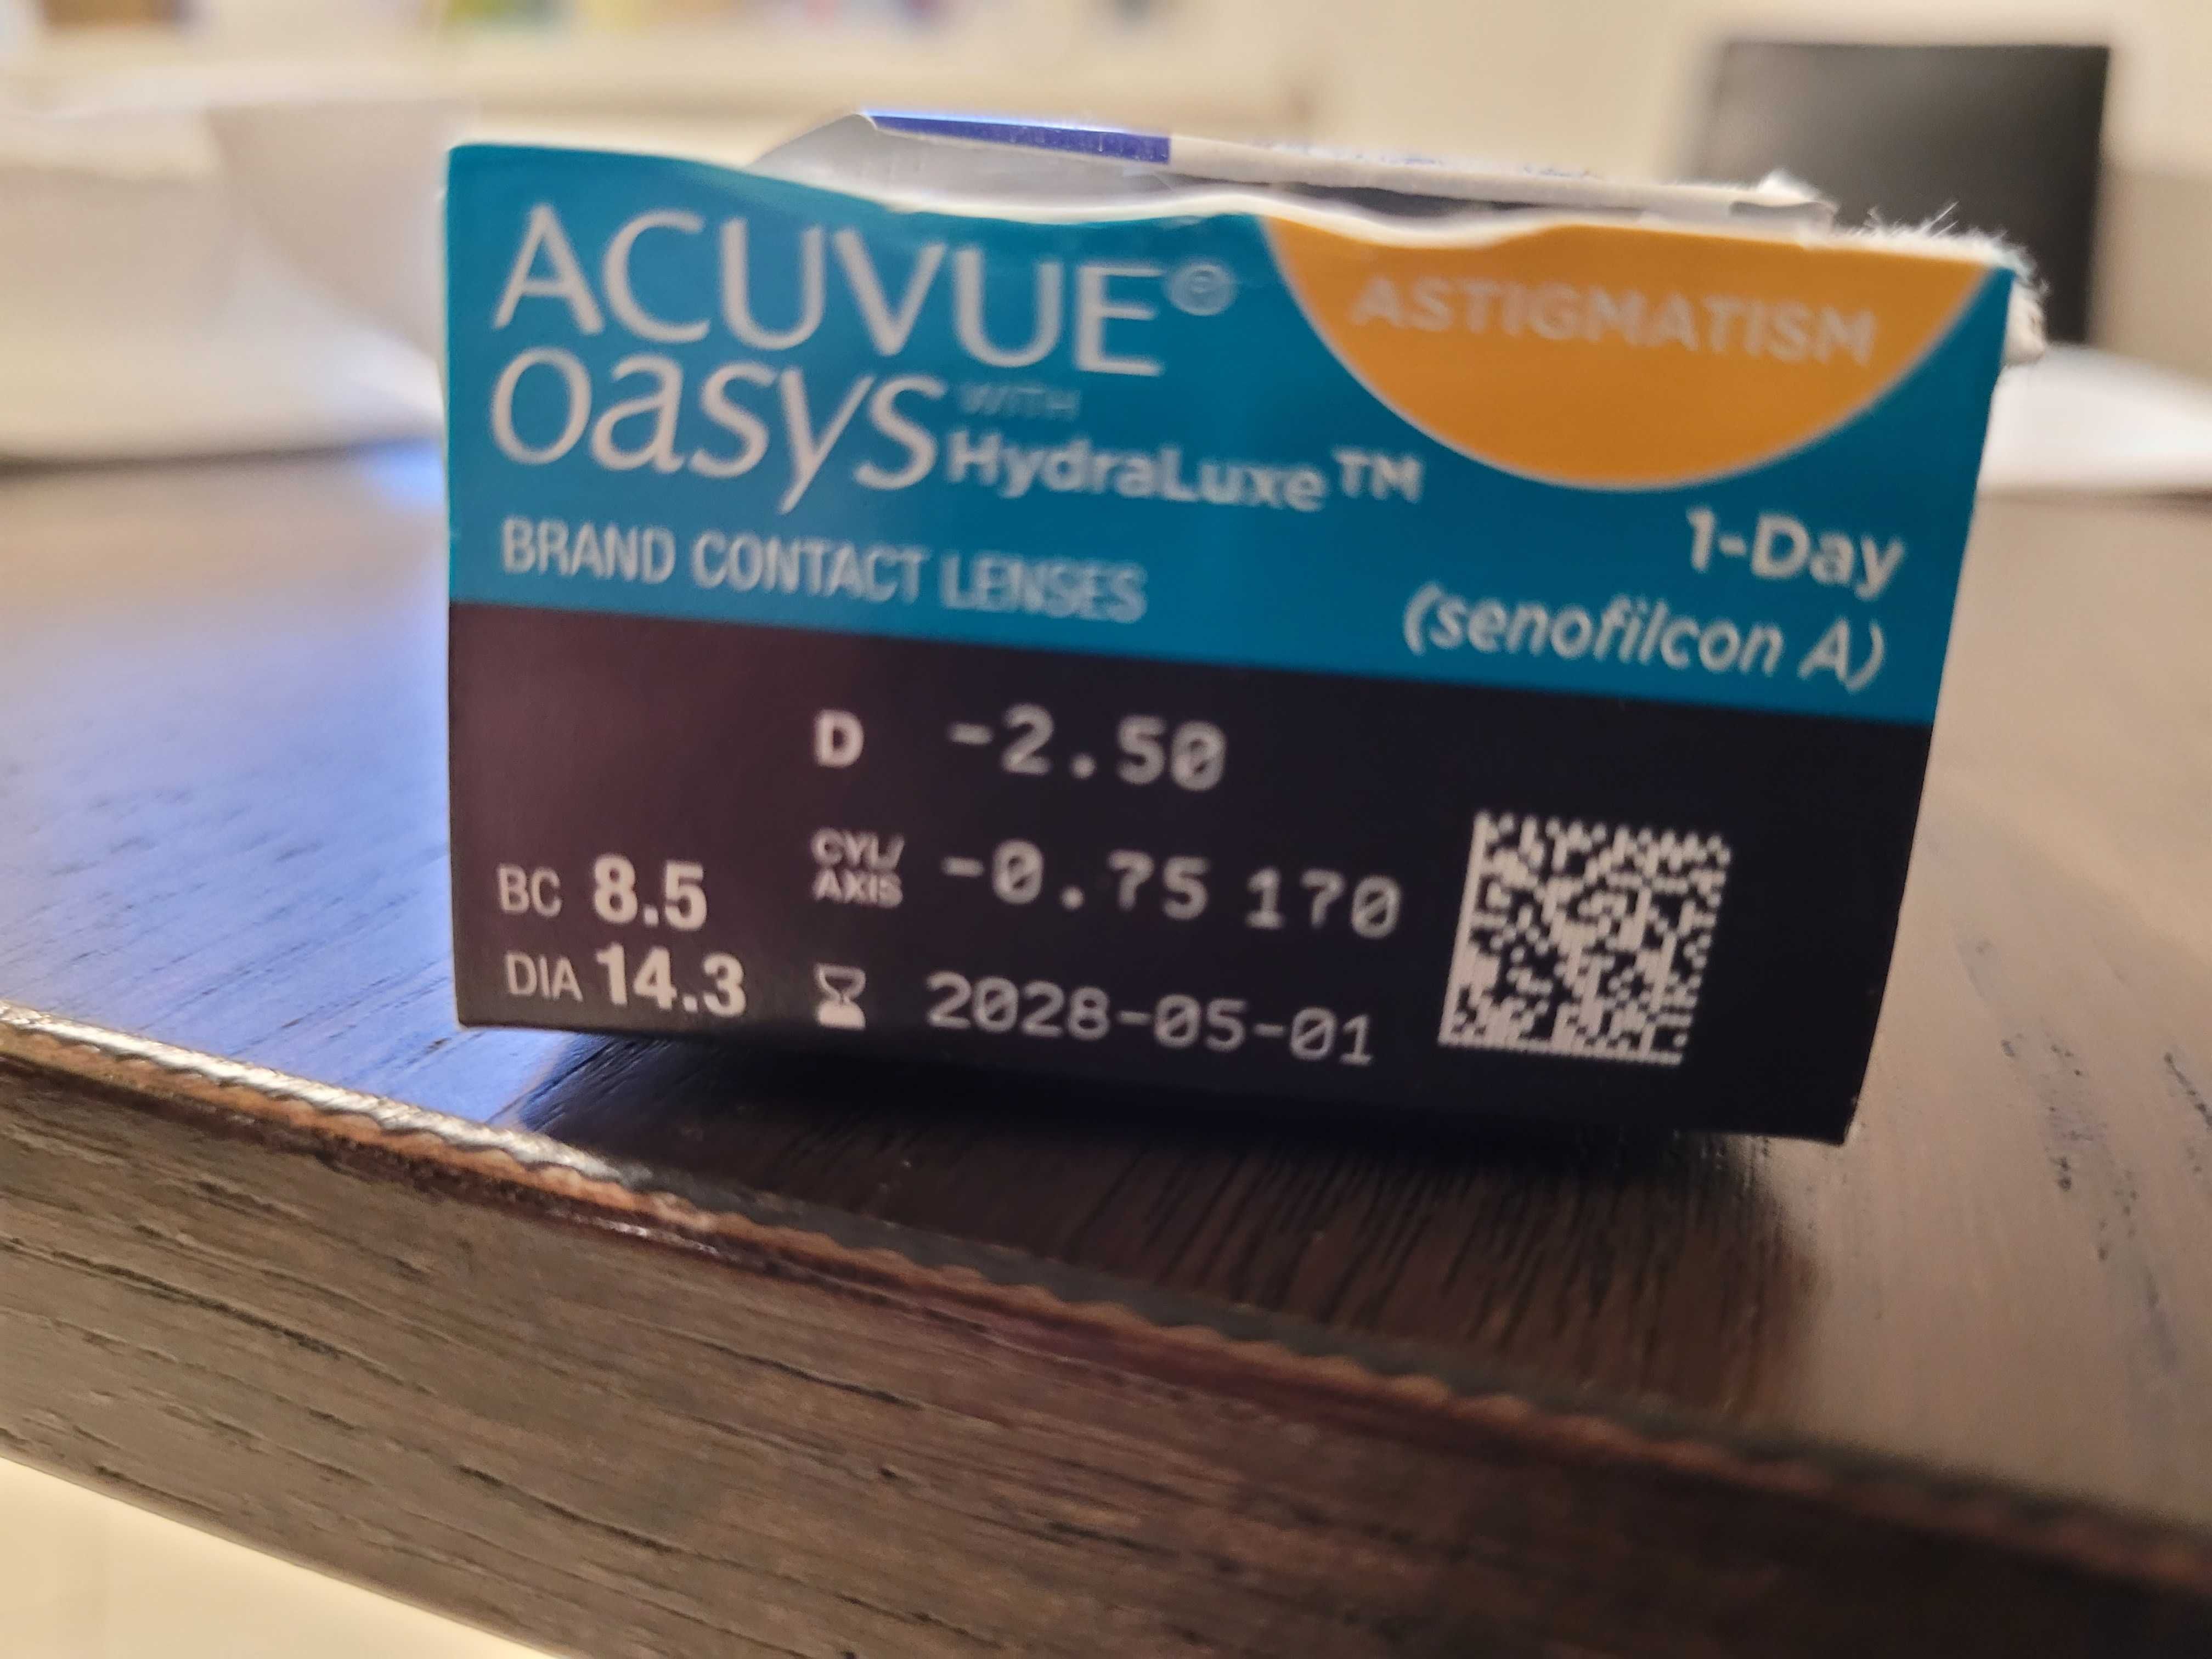 Soczewki ACUVUE oasys with HydraLuxe for ASTIGMATISM 1-day 29 szt.